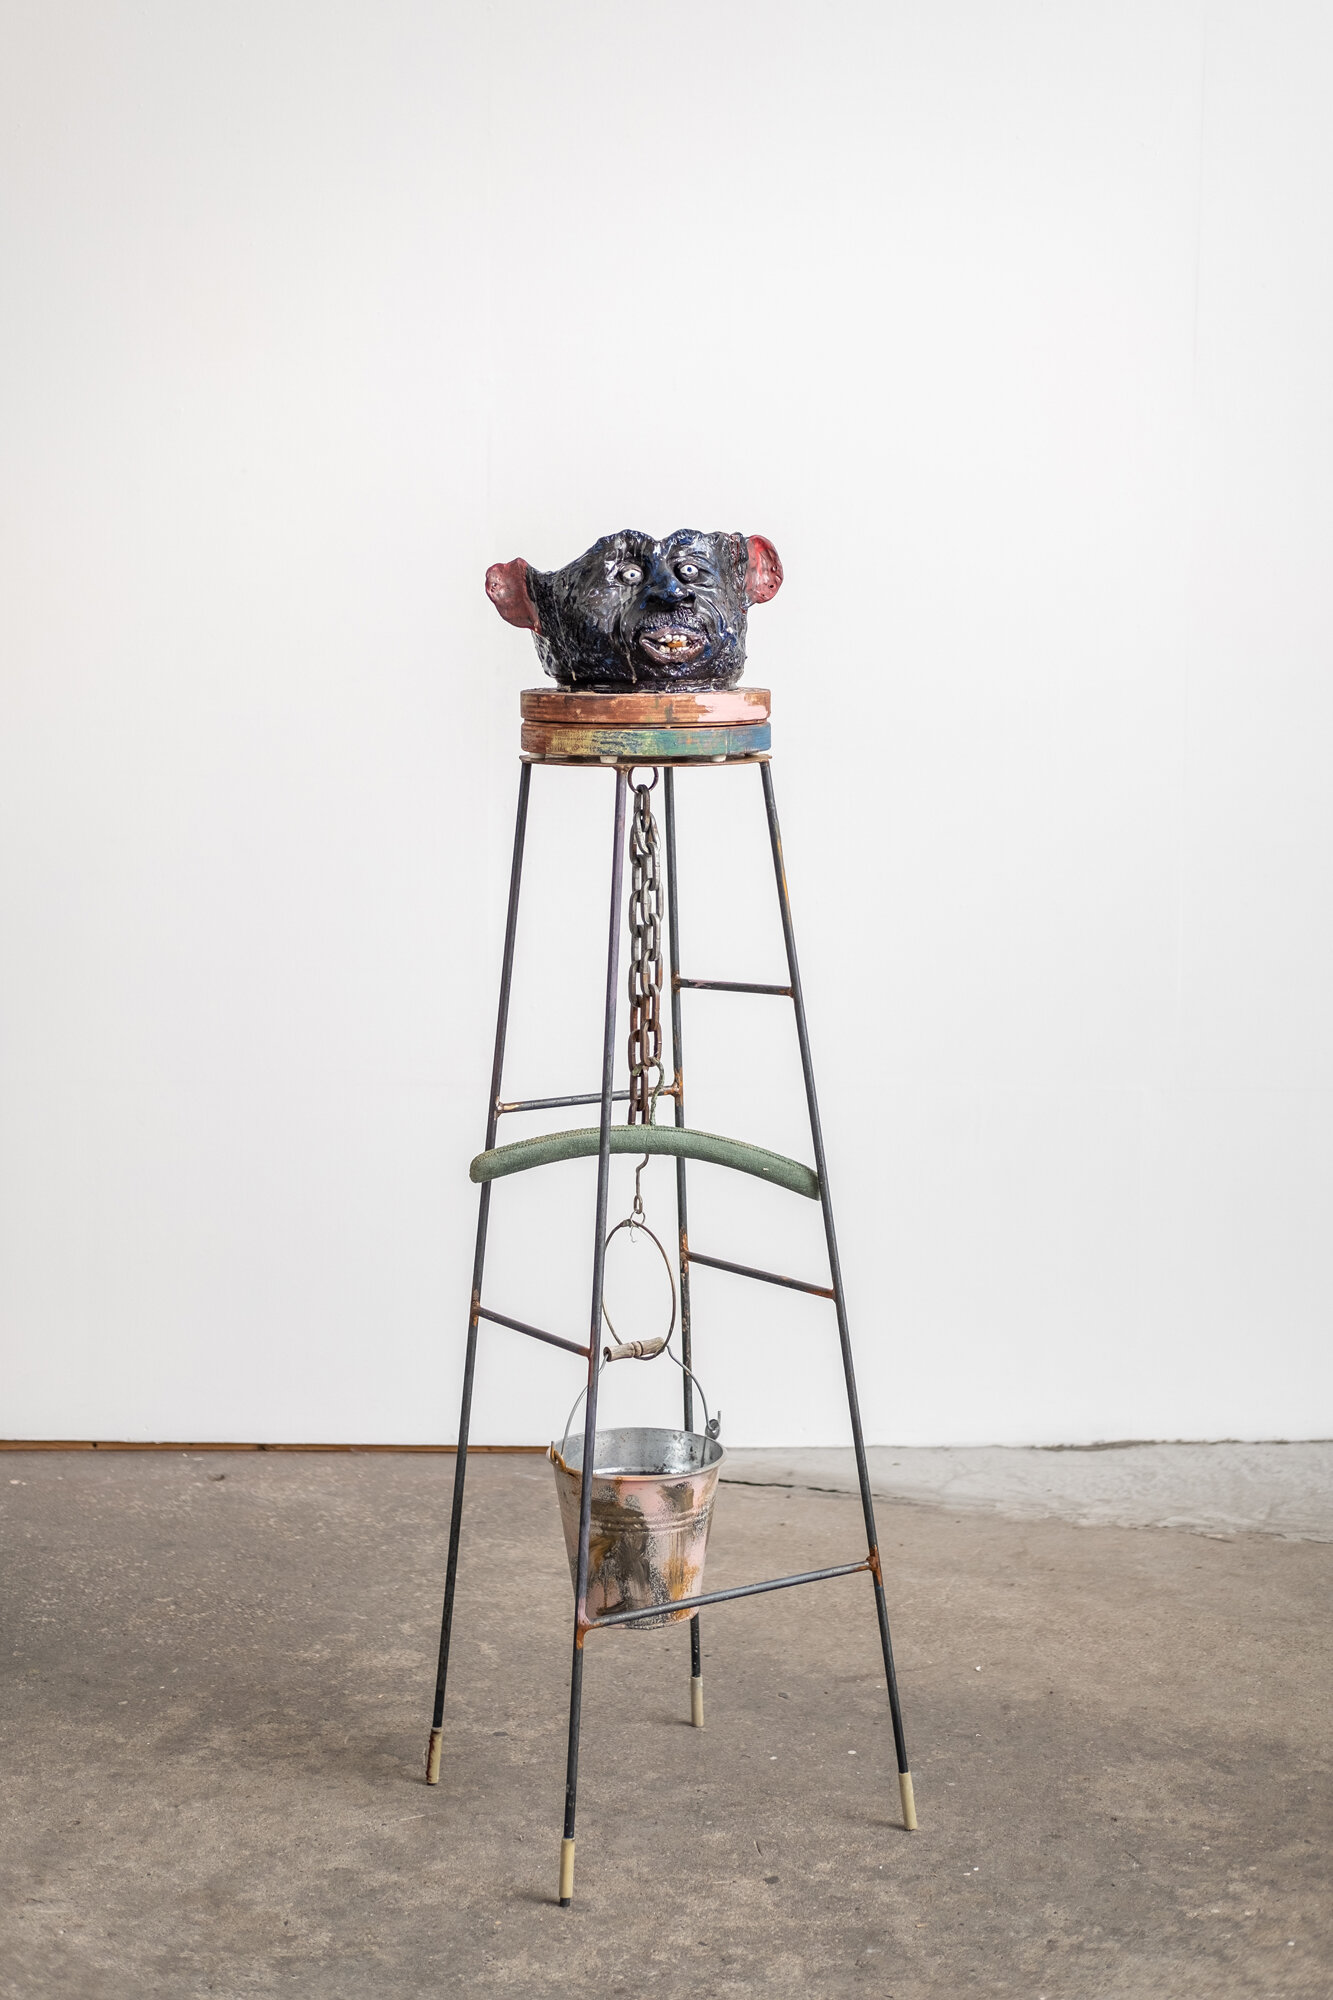   Q is for cumber’, 2021,  Ceramics, wax, resin, wood, metal, clothing hanger, spray paint and cigarette buds, oil paint, plastic and wood stain 162 x 50 x 46cm    Part of the exhibition That Clinking Clanking Clunking.  A humanoid chair sculpture fu